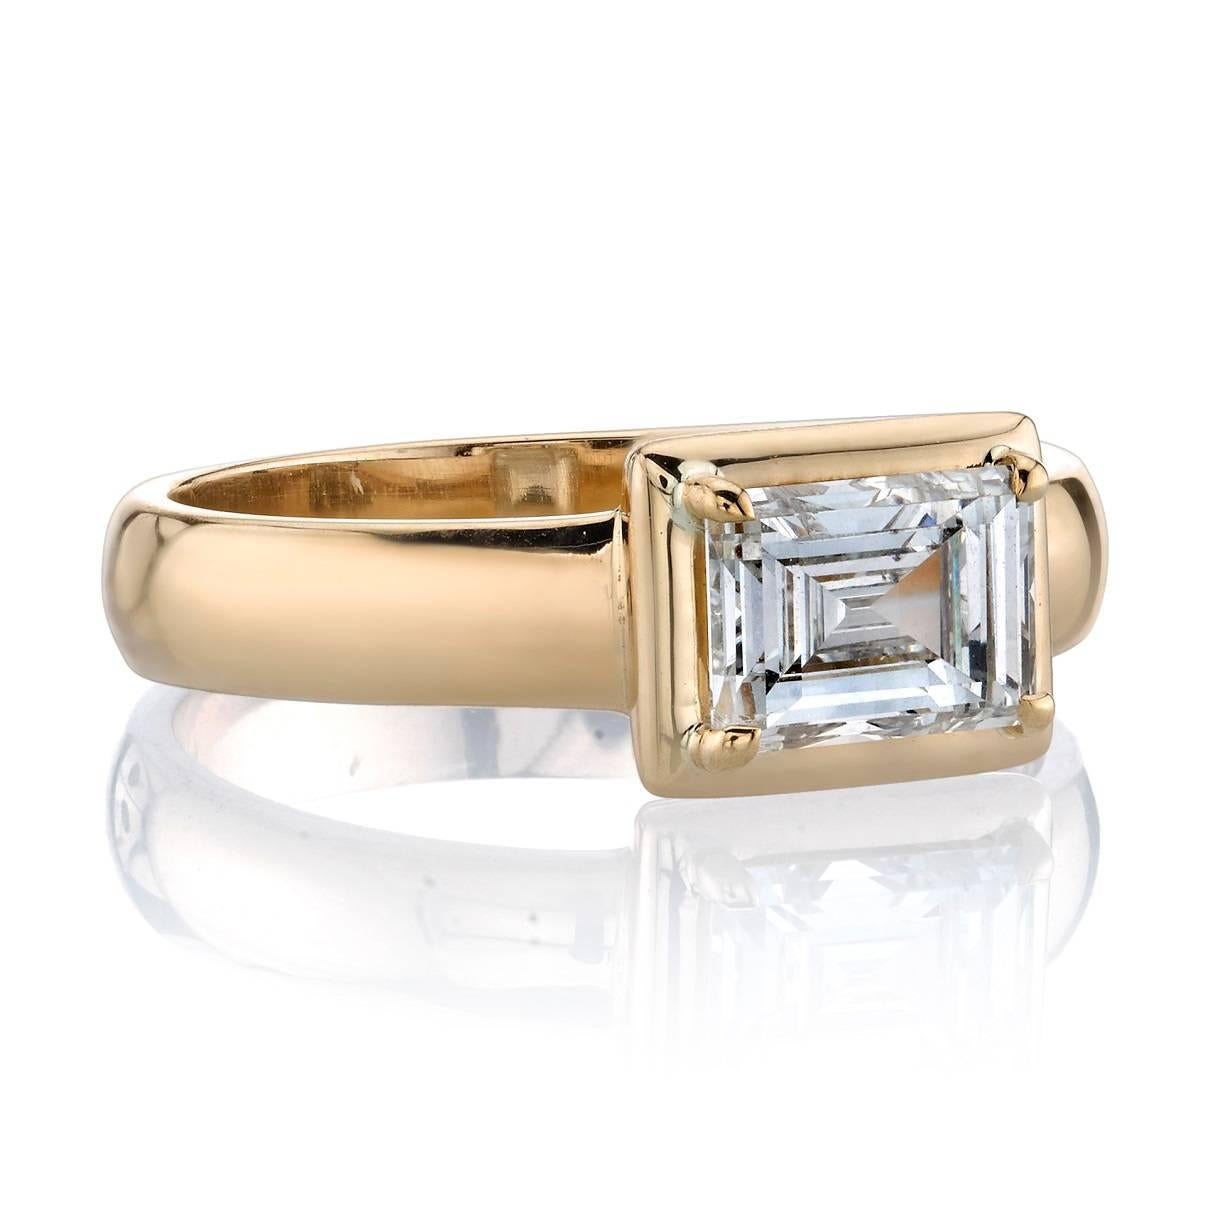 1.08ctw H/SI2 EGL certified Carré cut diamond prong set in a handcrafted 18k yellow gold mounting. 


